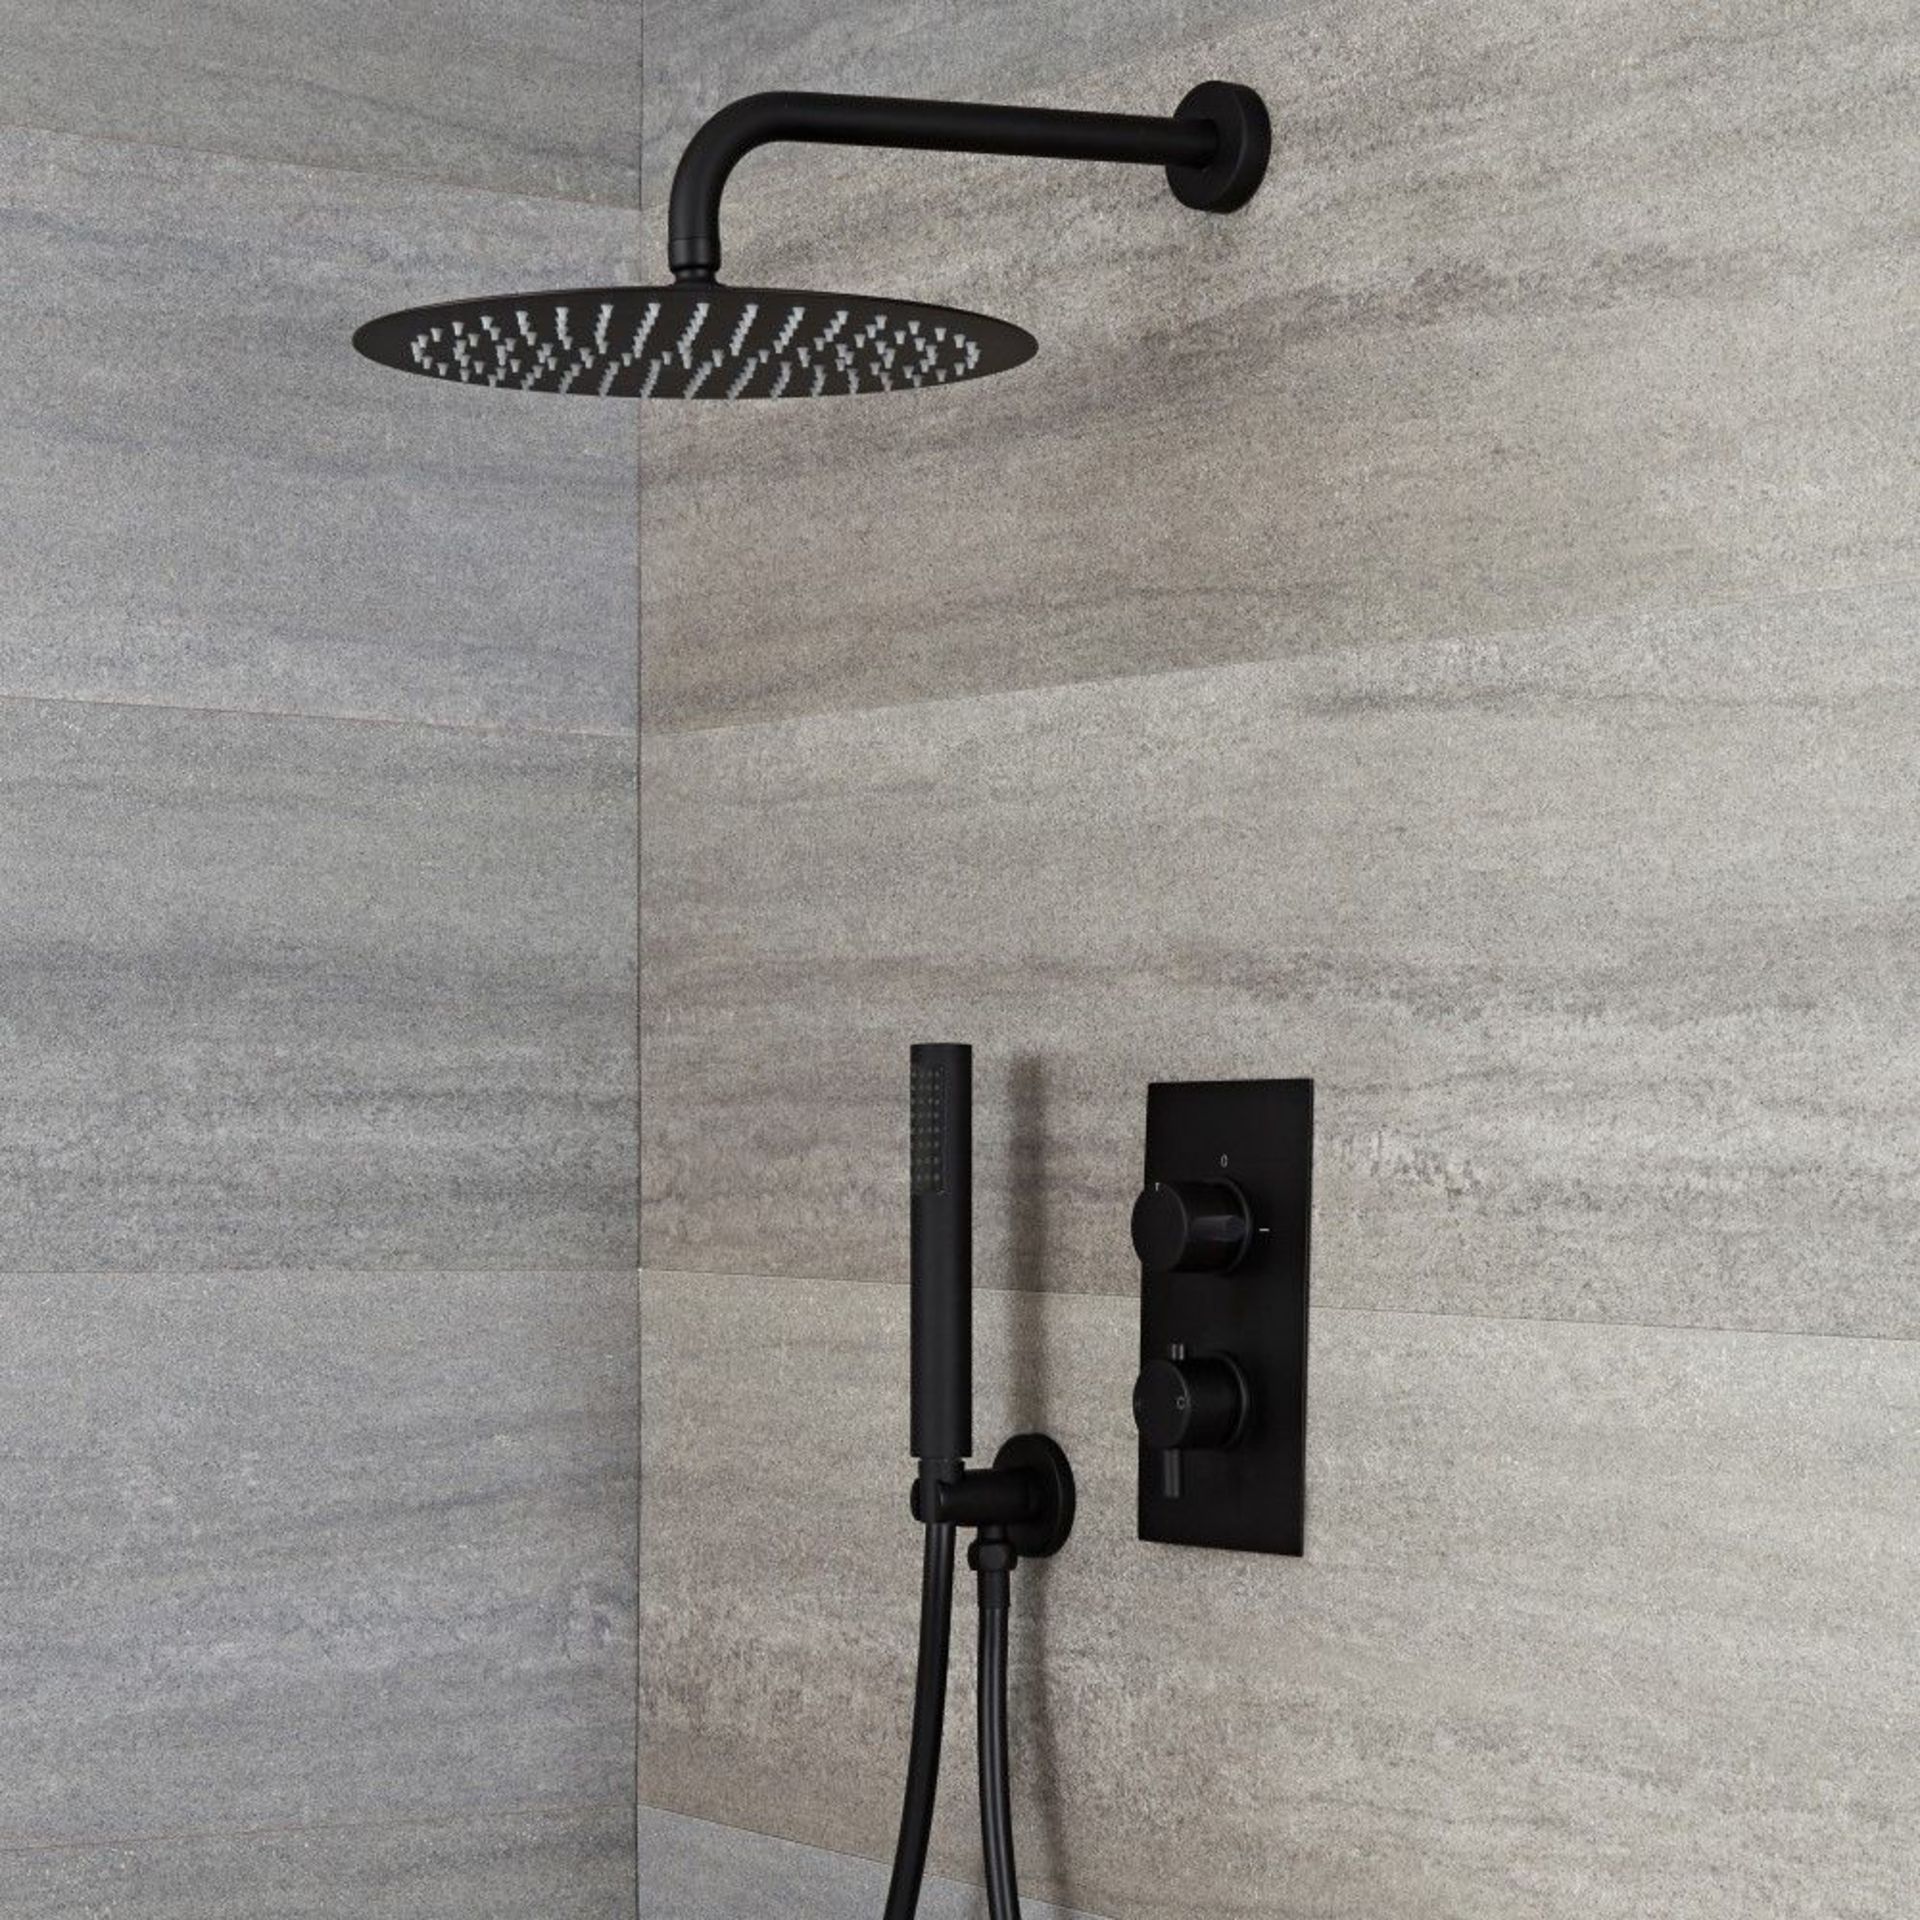 New & Boxed Round Concealed Thermostatic Mixer Shower Kit & Large Head, Matte Black. RRP £499...